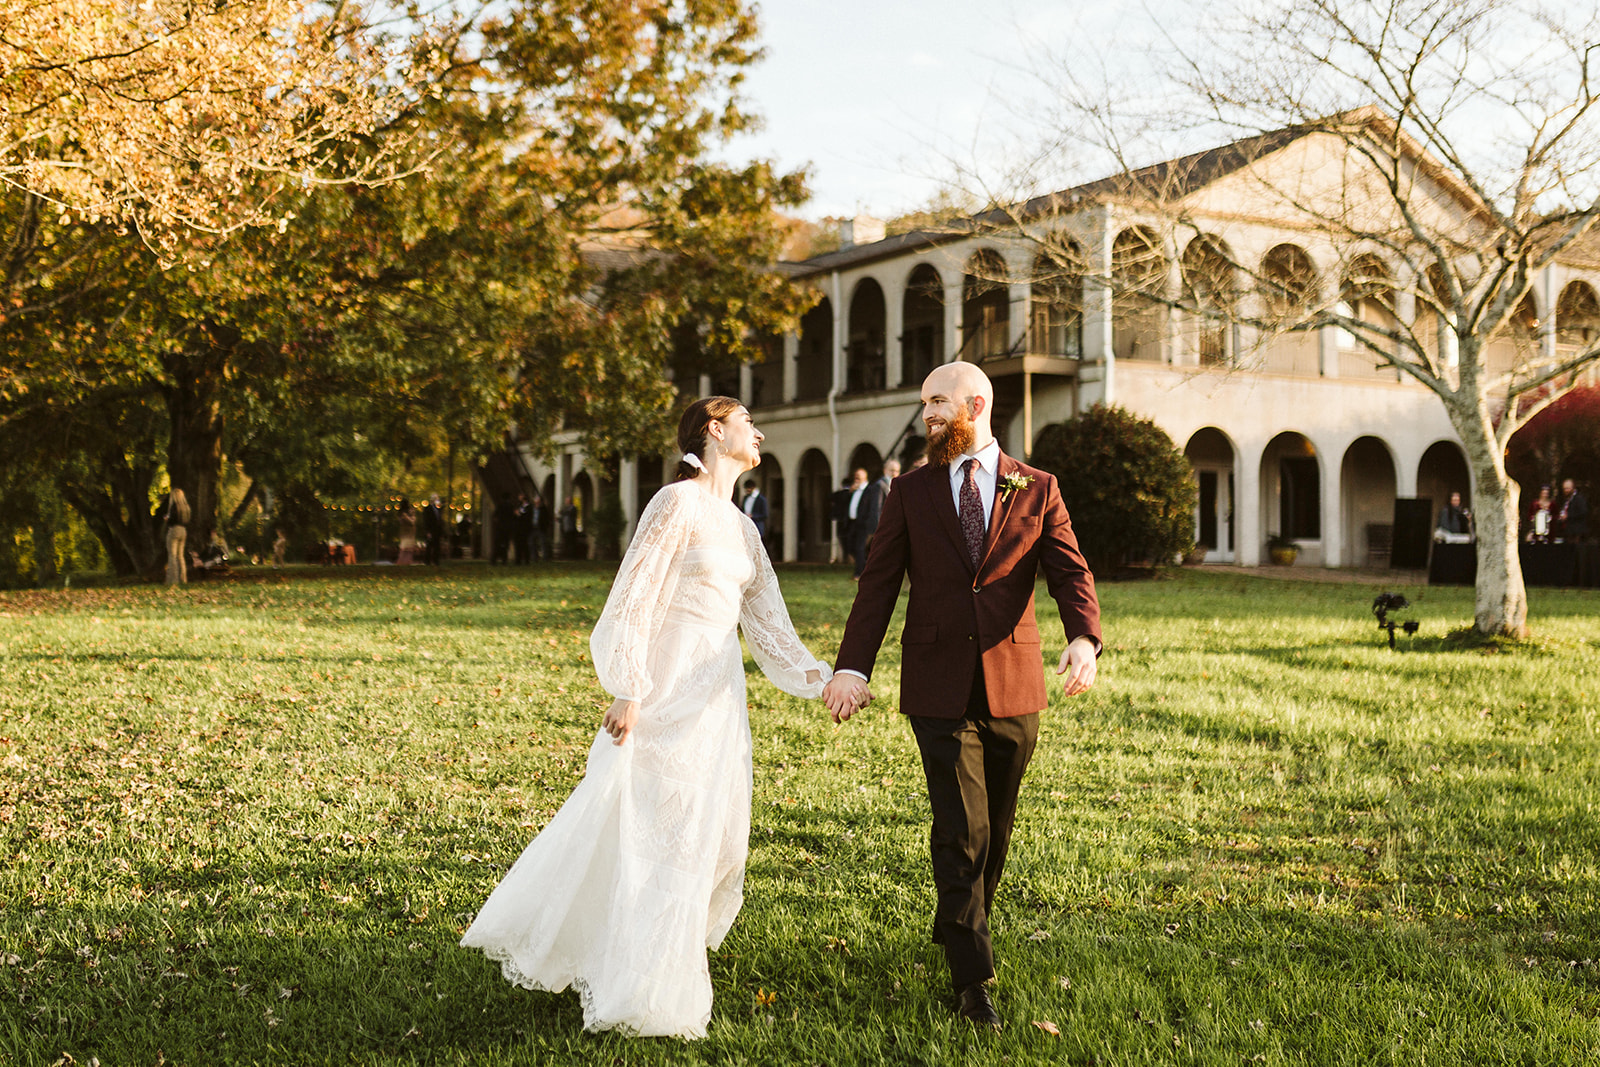 A bride and groom walk hand-in-hand across the lawn of their wedding venue.